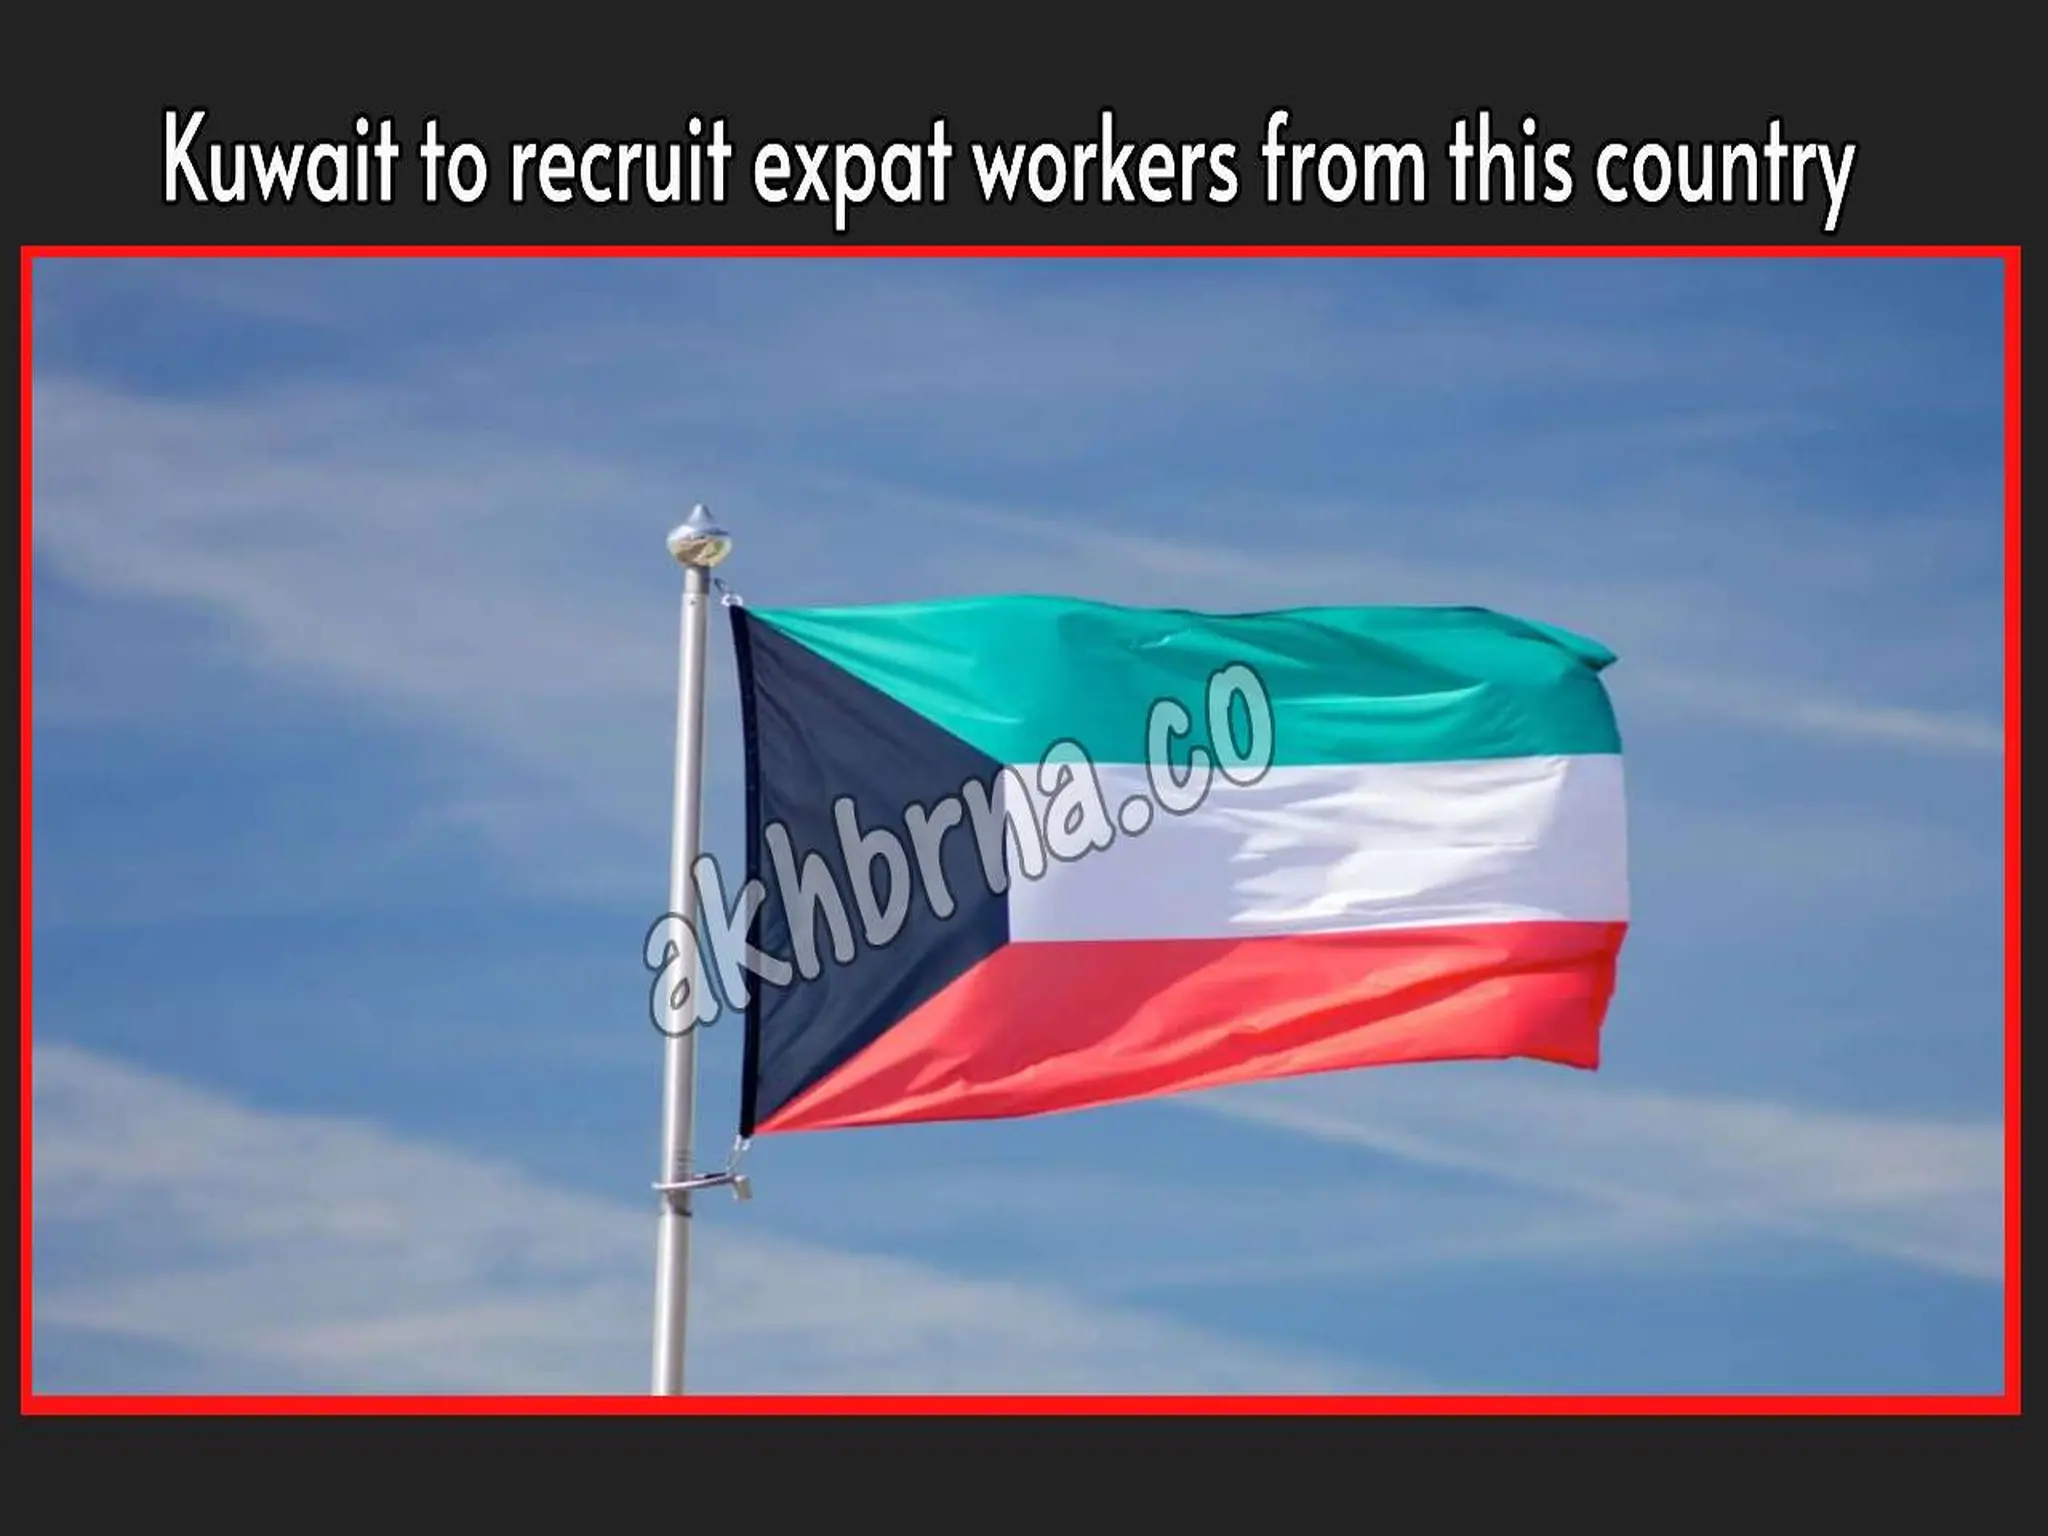 Kuwait to recruit expat workers from this country